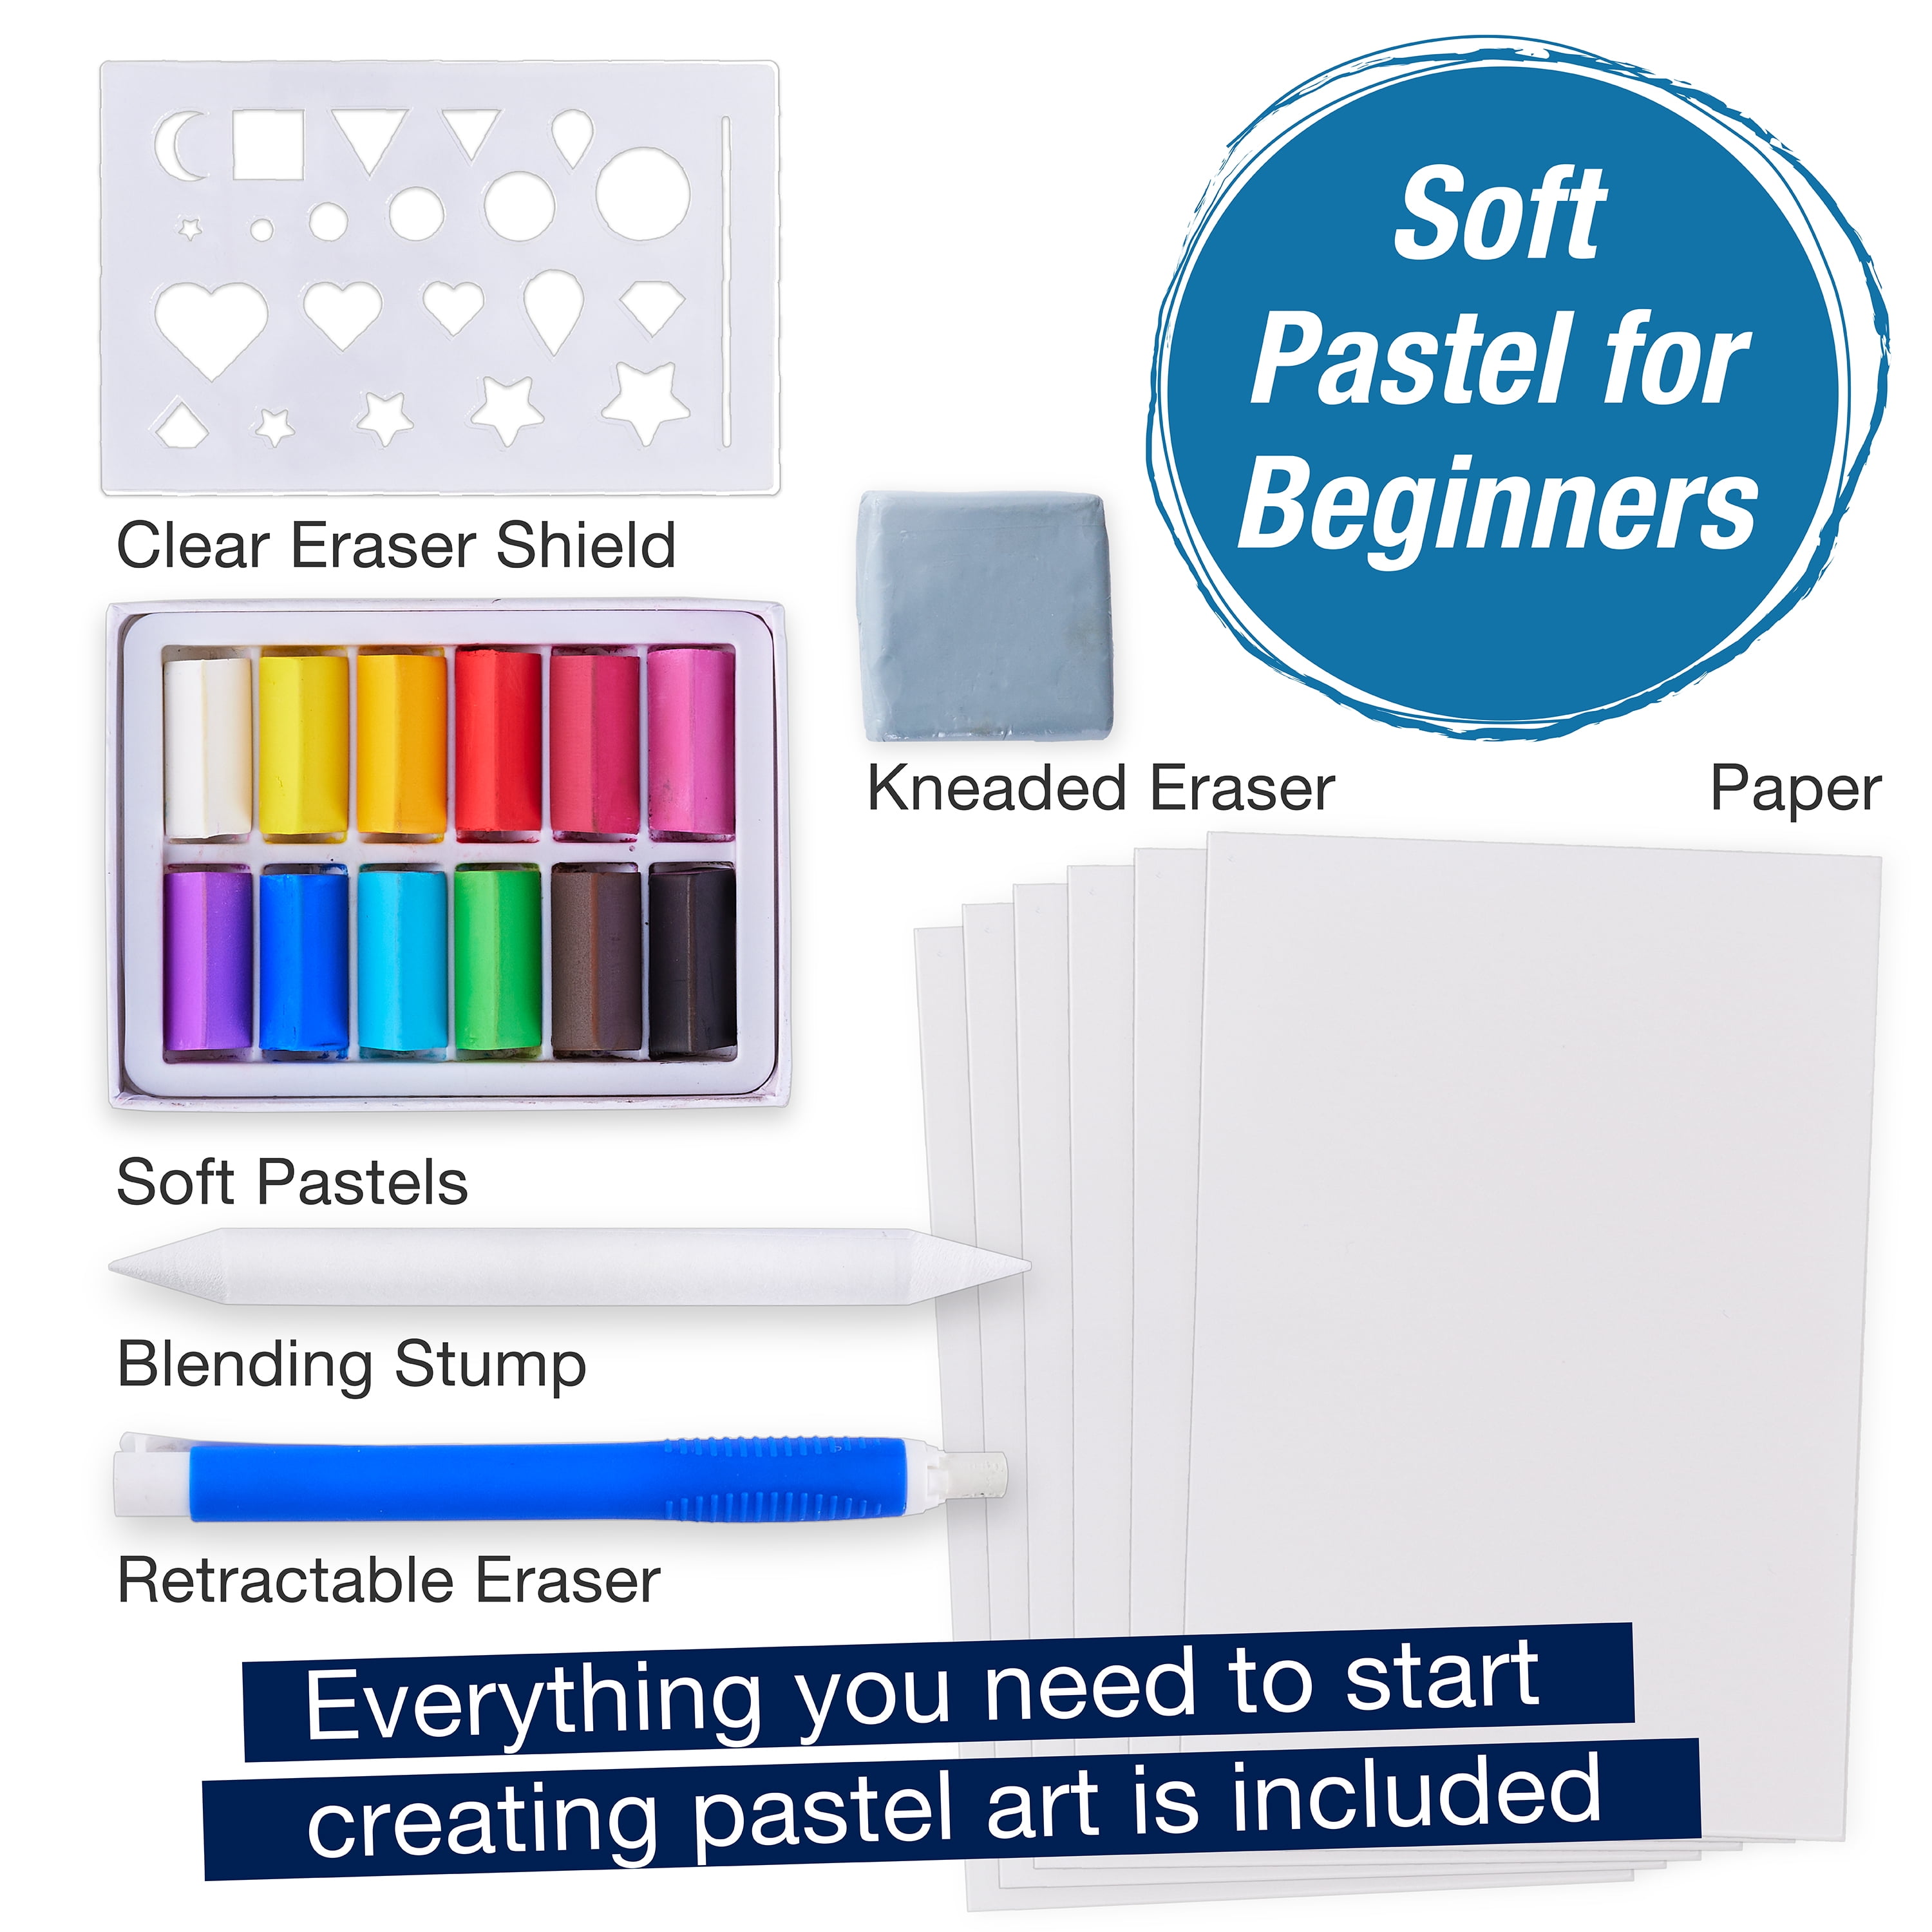 Oil Pastels, Set of 12 - #127012 – Faber-Castell USA